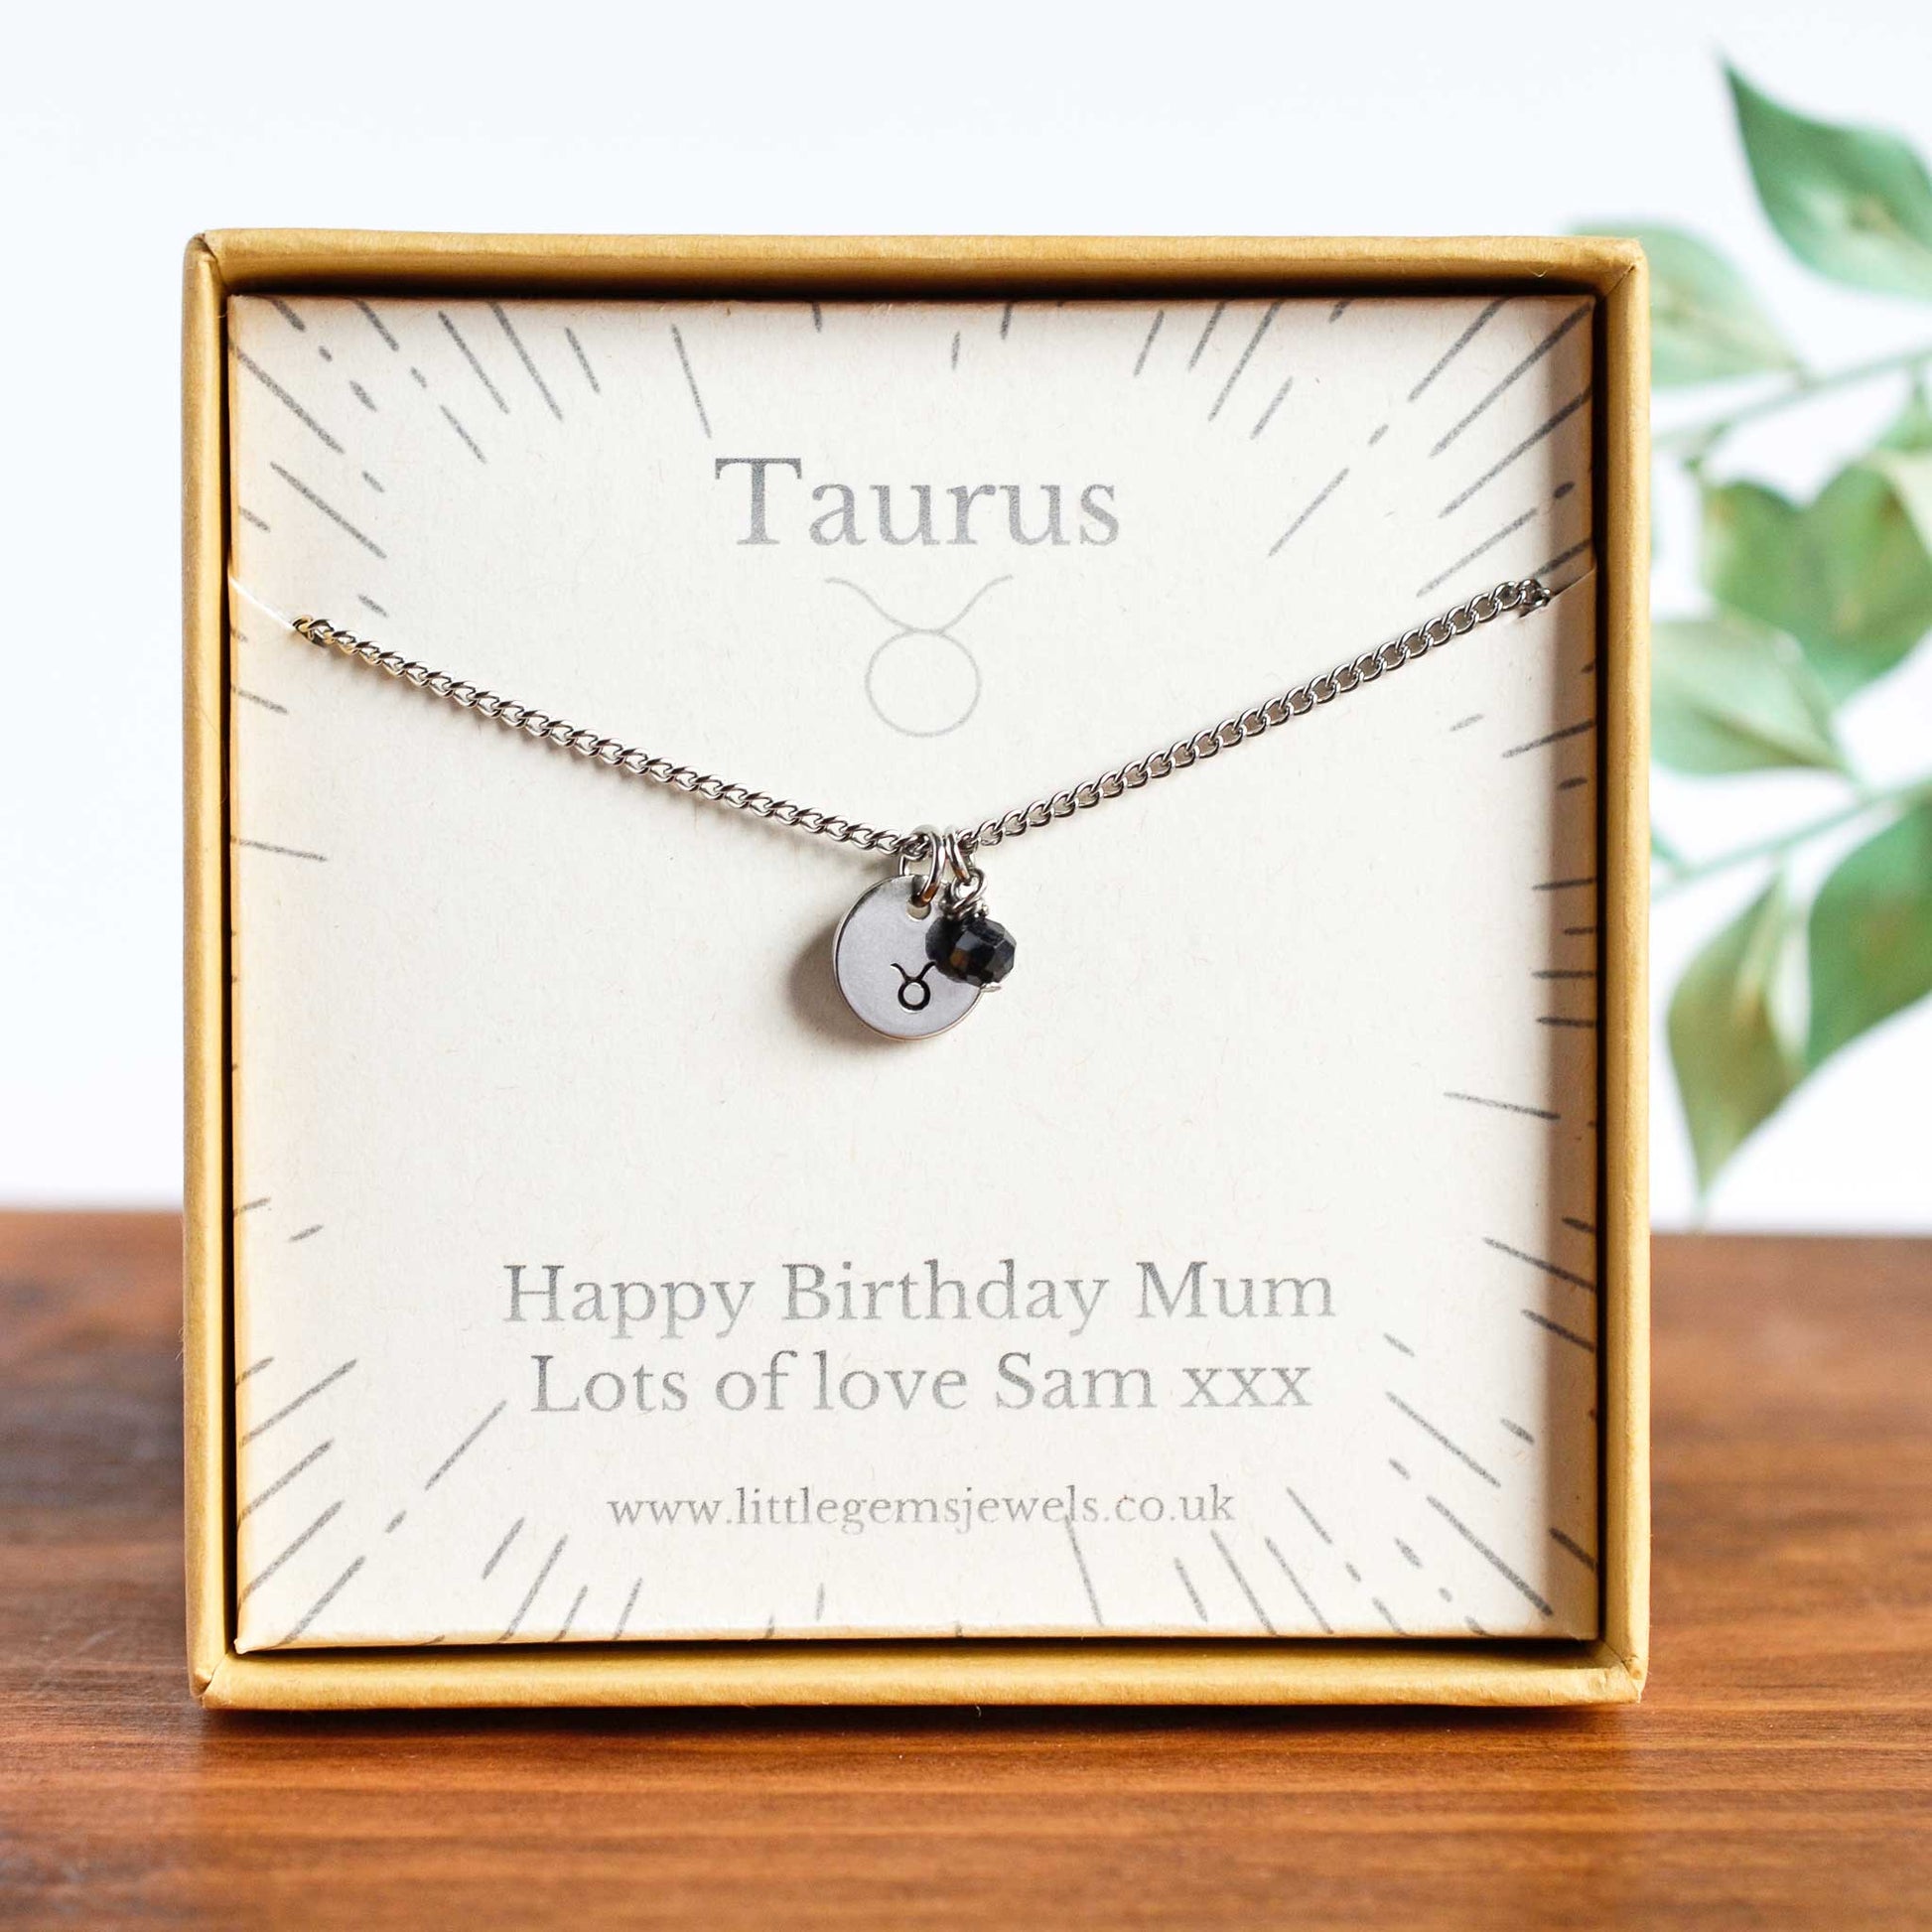 Taurus Zodiac necklace with personalised gift message in eco friendly gift box